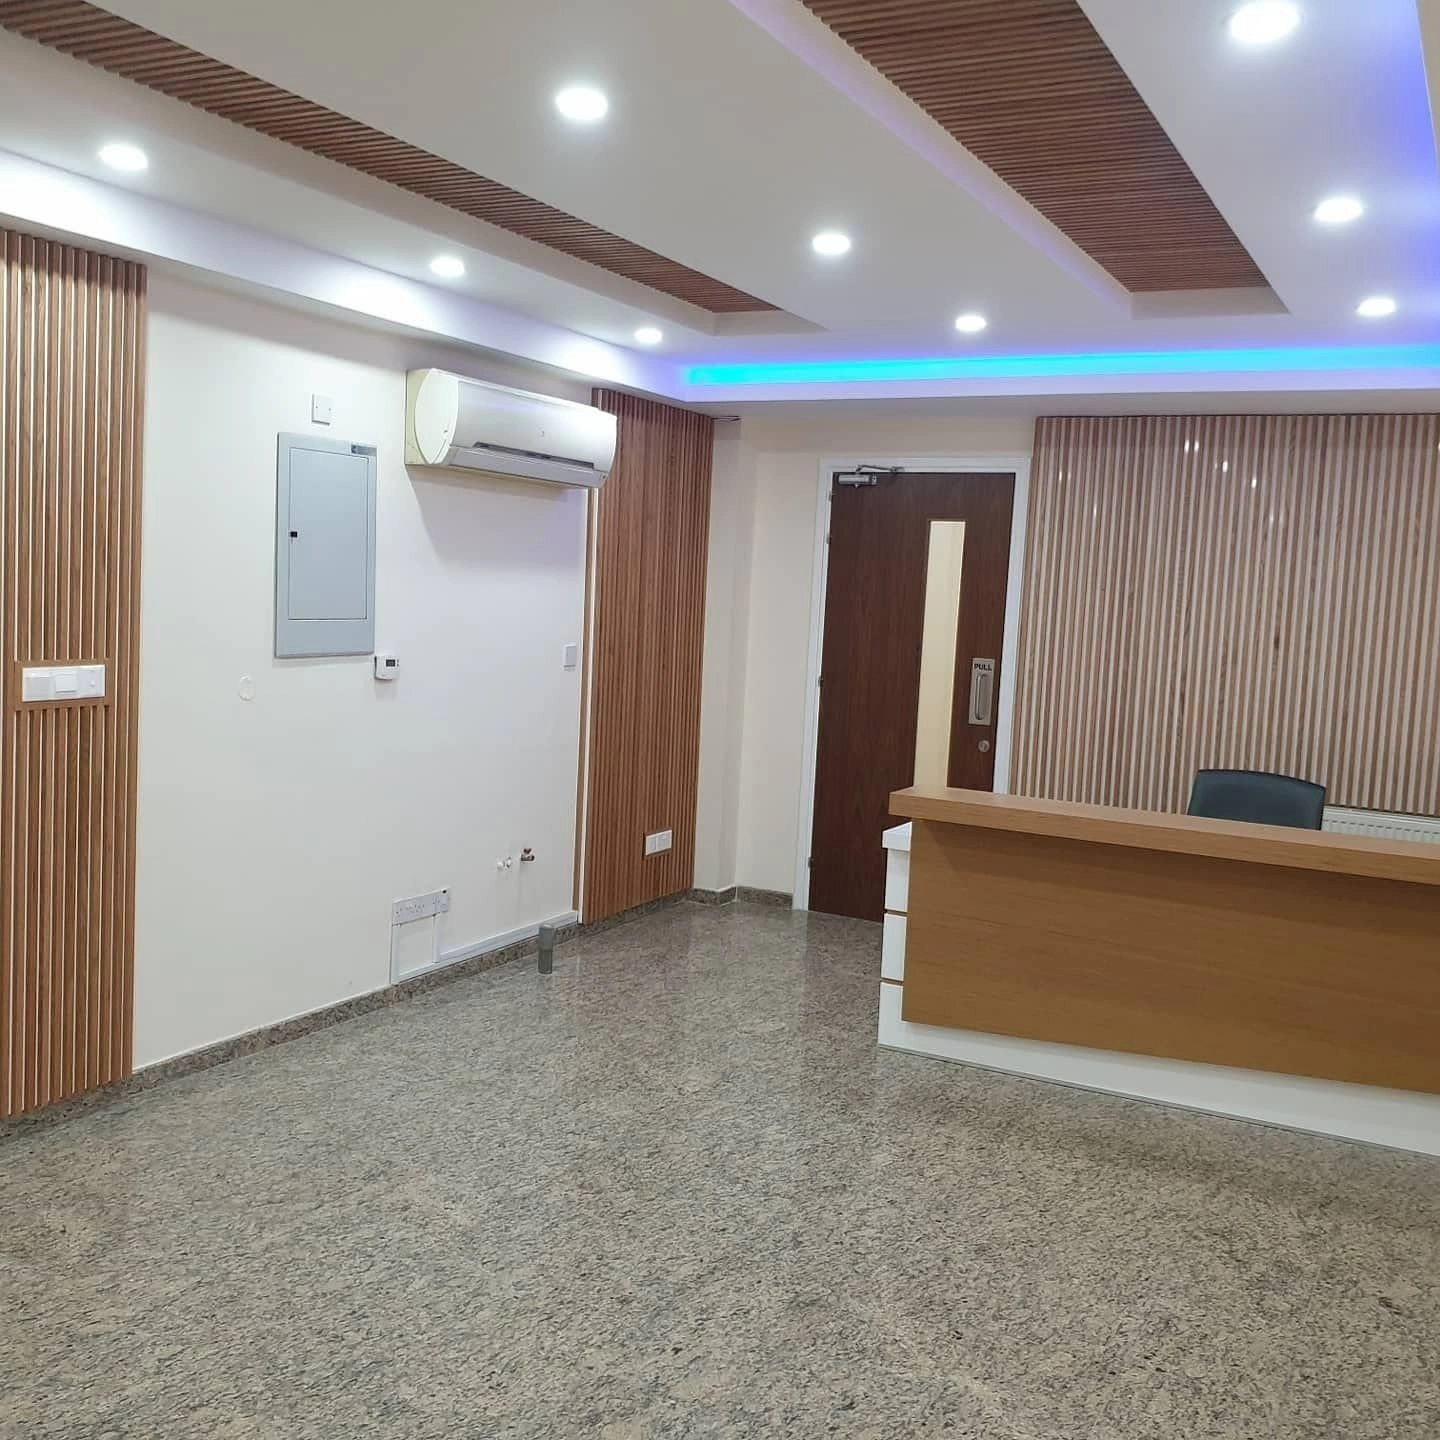 300m² Office for Rent in Paphos – Agios Theodoros